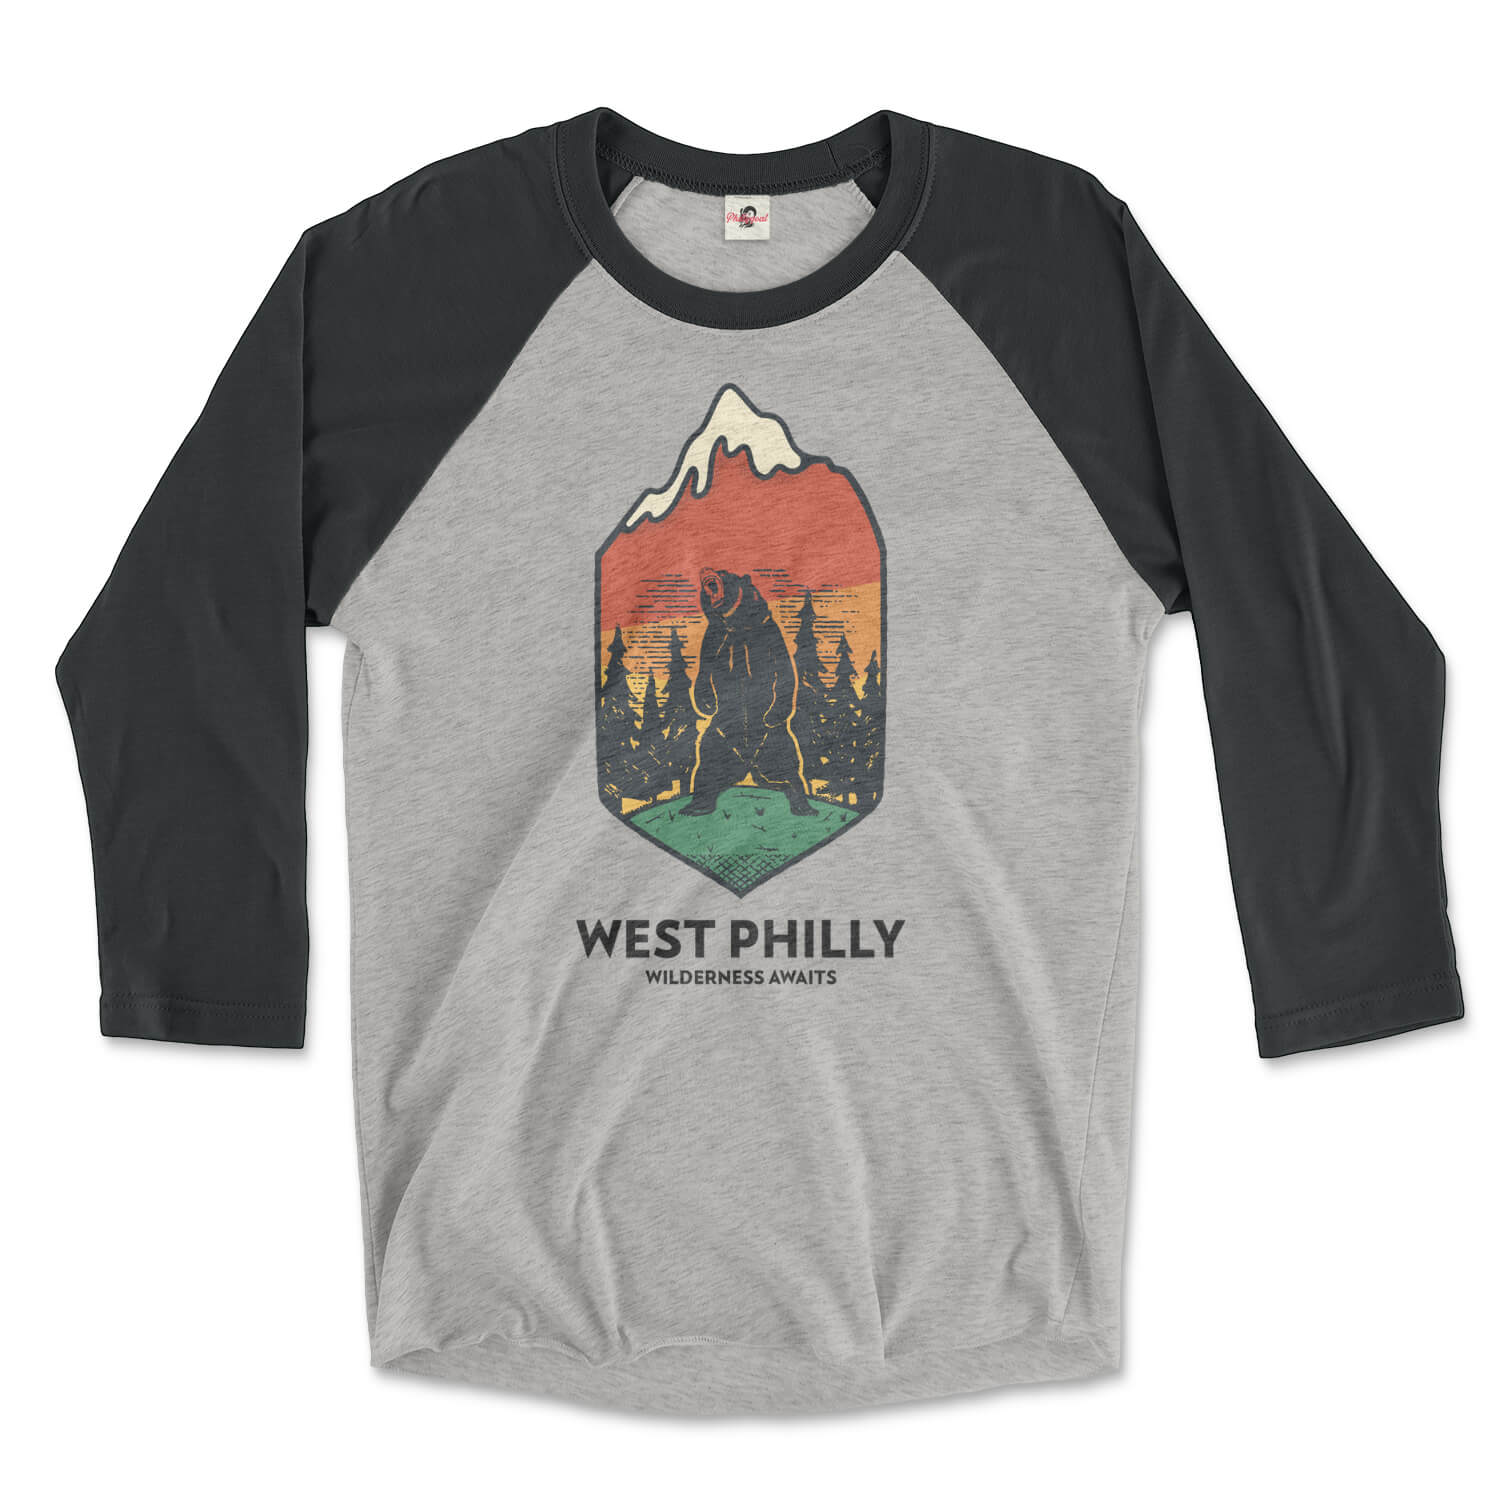 west philadelphia ironic philly wilderness awaits design of bear mountains and trees on a vintage black and premium heather grey 3/4 long sleeve raglan tee from phillygoat